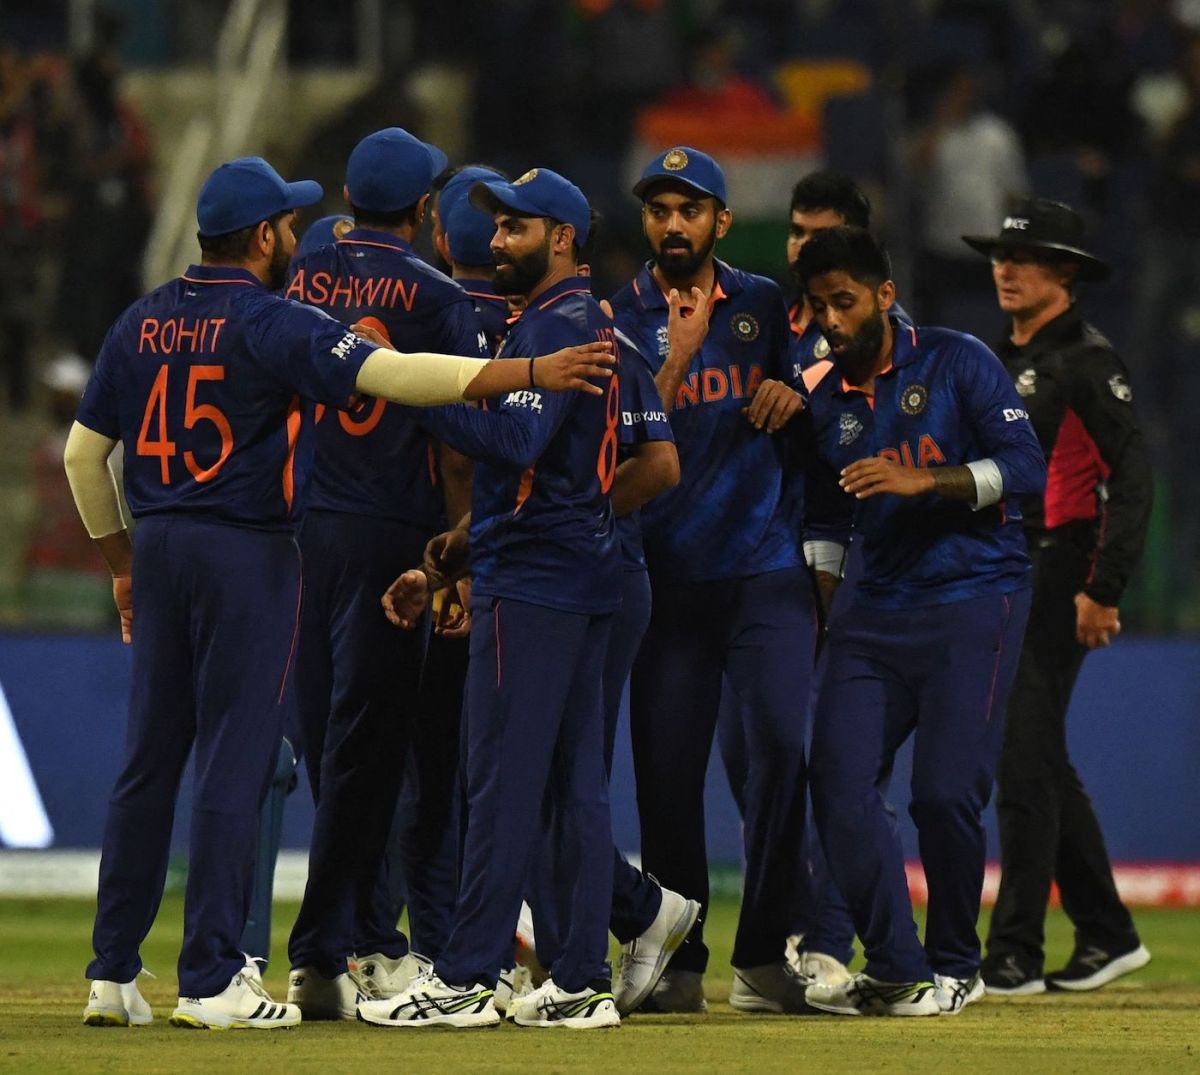 ICC T20 World Cup 2021: India vs Namibia – Who Will Win The Match?